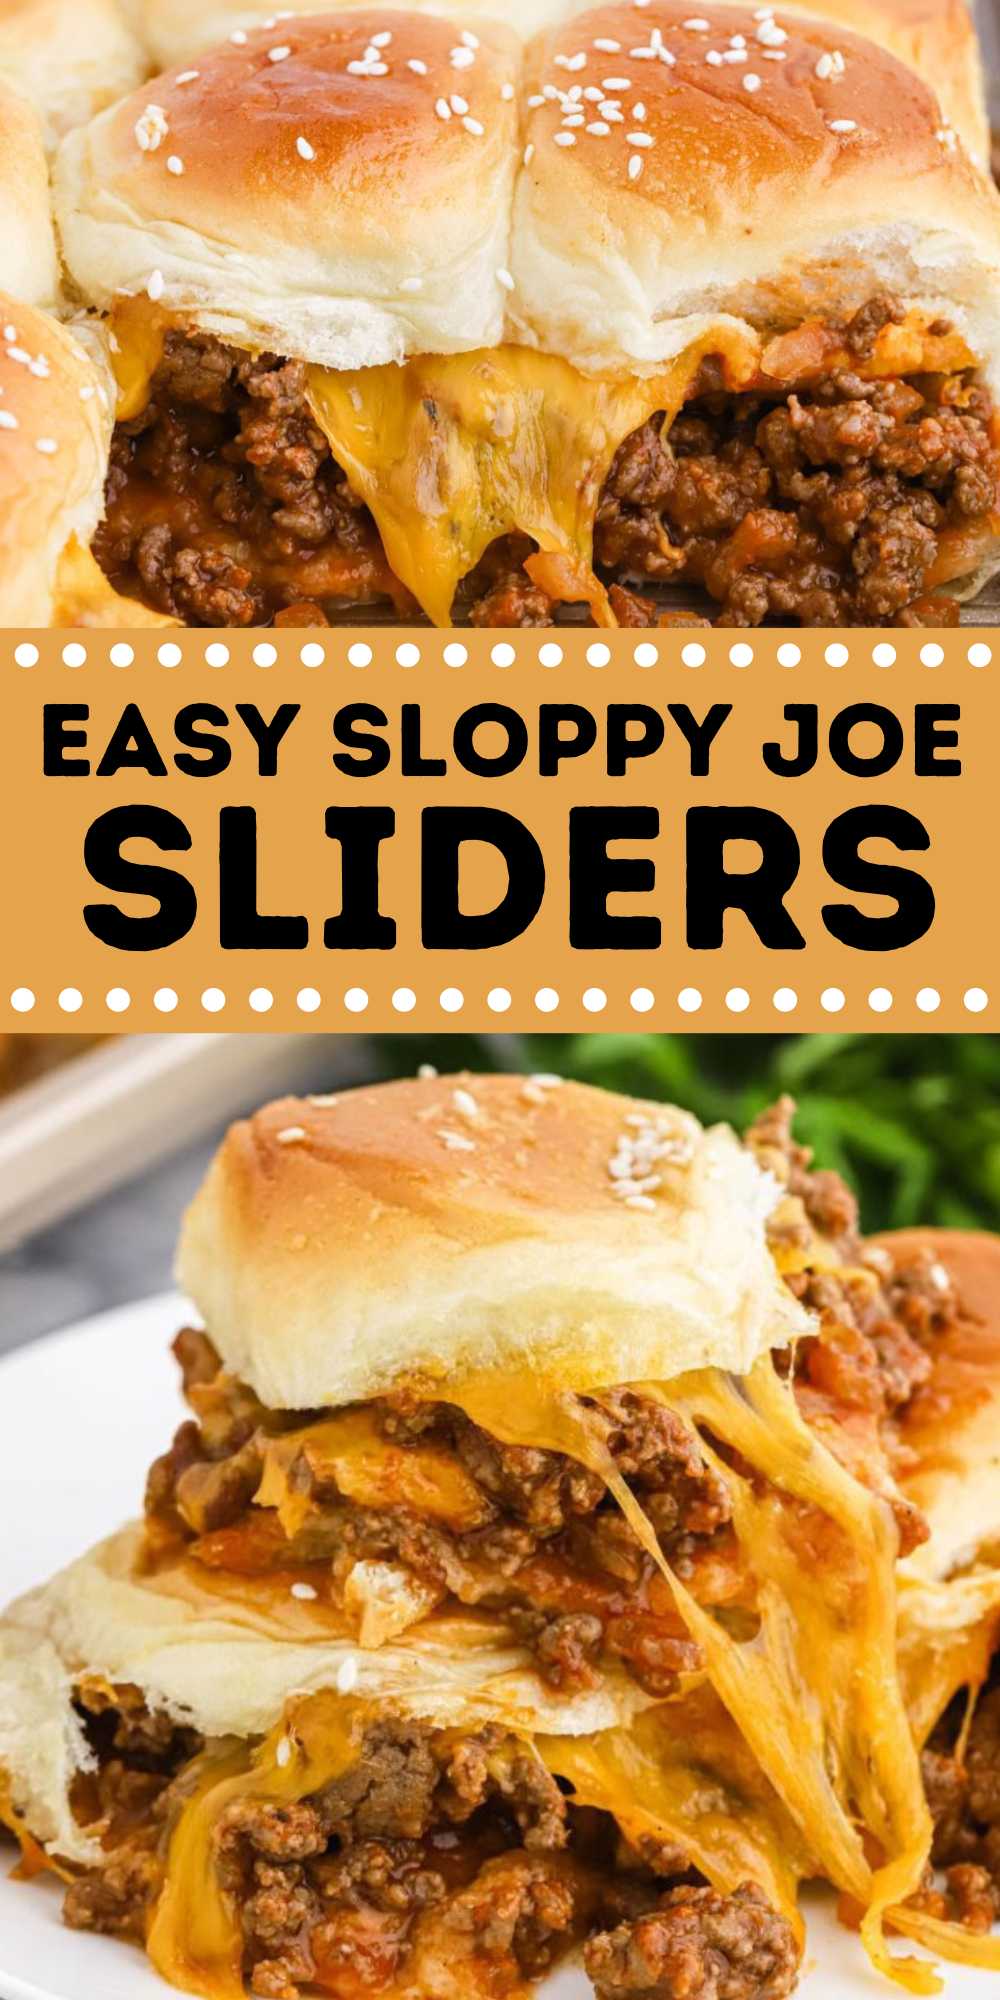 If you love sloppy joes, then you need to make these Sloppy Joe Sliders. The perfect weeknight dinner or to feed a crowd. These sliders can easily be customized to what you prefer. Add your favorite side dish and make it a complete meal idea. #eatingonadime #sloppyjoesliders #sliders #sloppyjoe